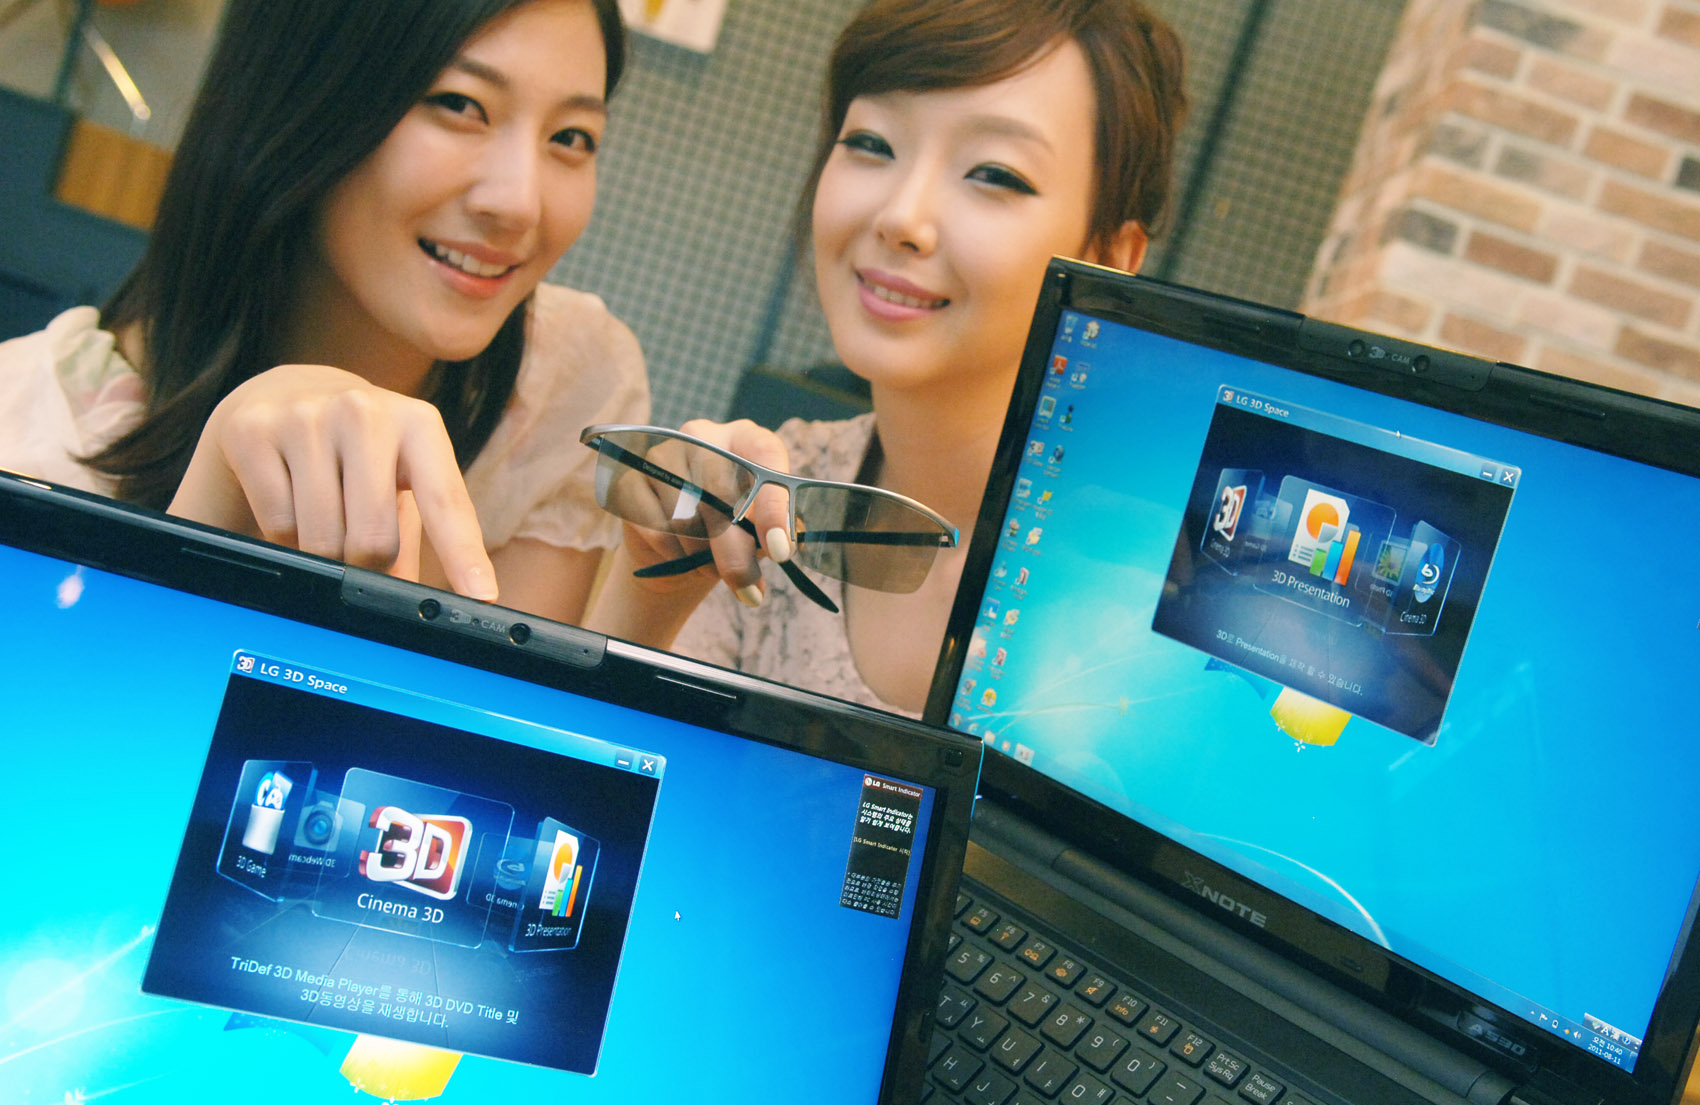 Two models present LG 3D notebooks while one of them holds 3D glasses